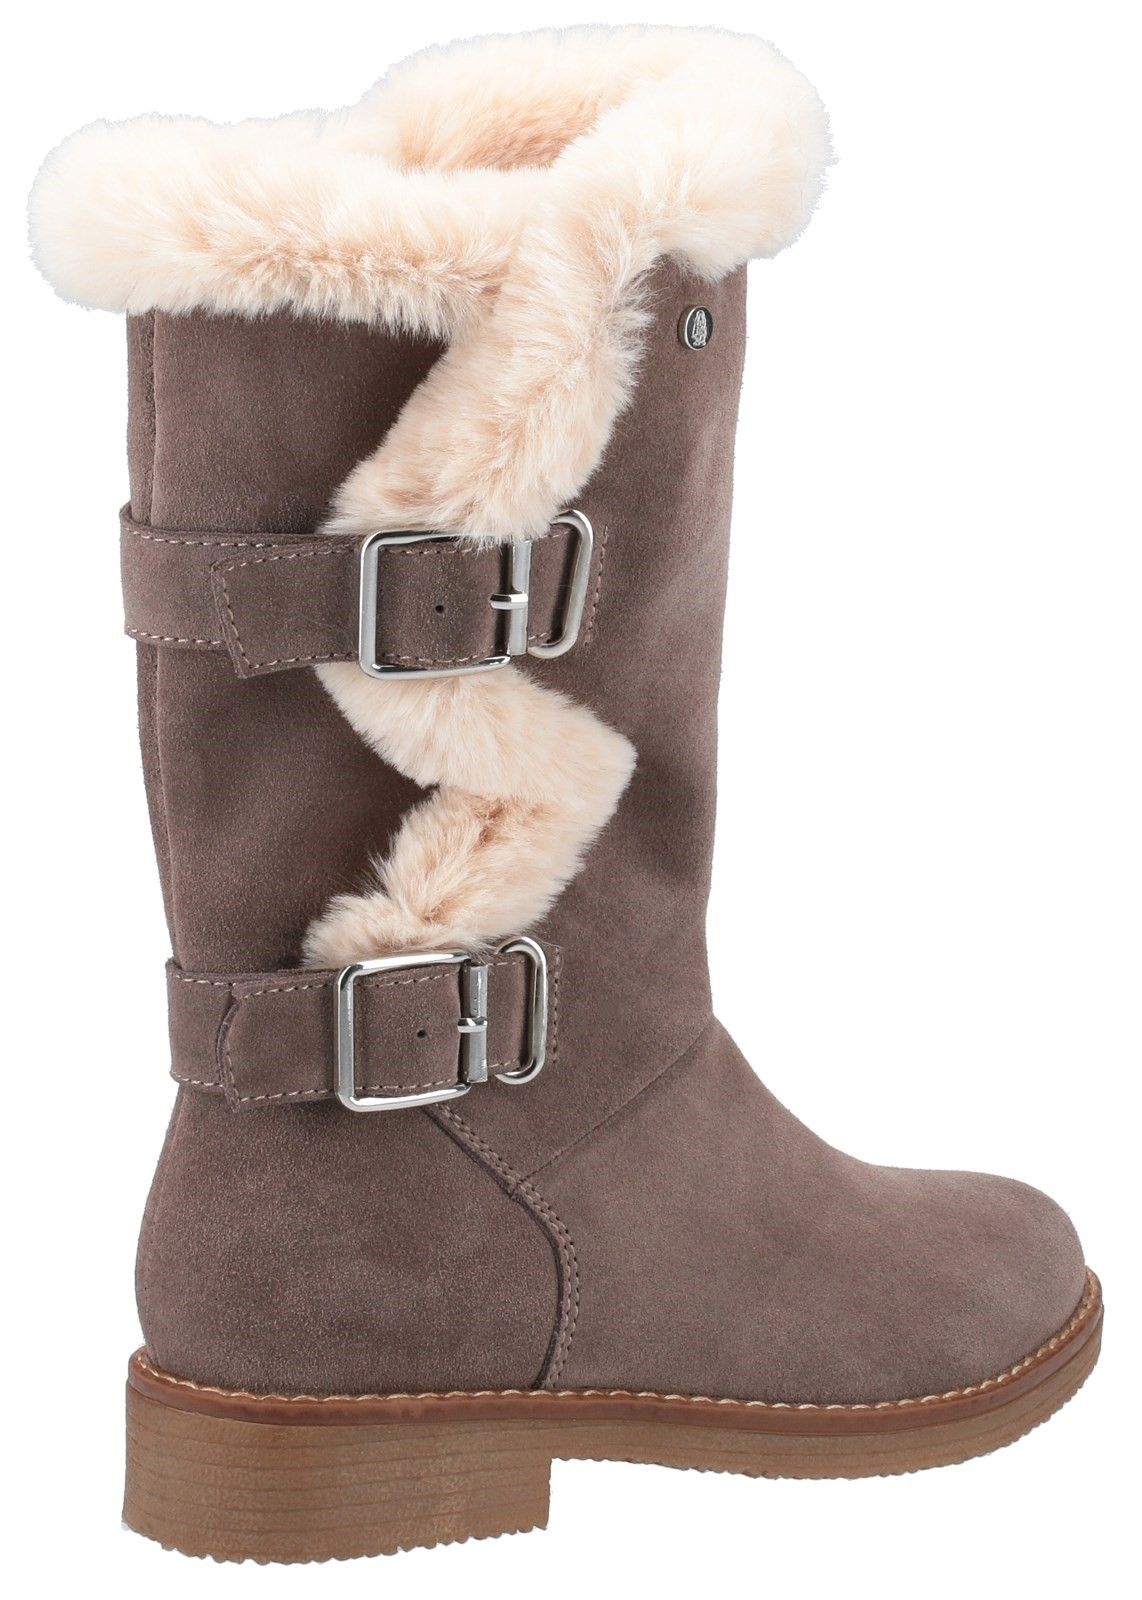 Women's cosy faux fur lined boot. Megan has a water-resistant real suede upper with warm fleece lining. Features cushion comfort memory foam leather insole and functioning inside zip, with flexible and hardwearing TPR outsole.Water resistant real suede and faux fur upper. 
Cosy fleece lining with soft faux fur collar. 
Cushion comfort memory foam leather insole. 
Functioning inside zip. 
Flexible and hardwearing TPR sole.